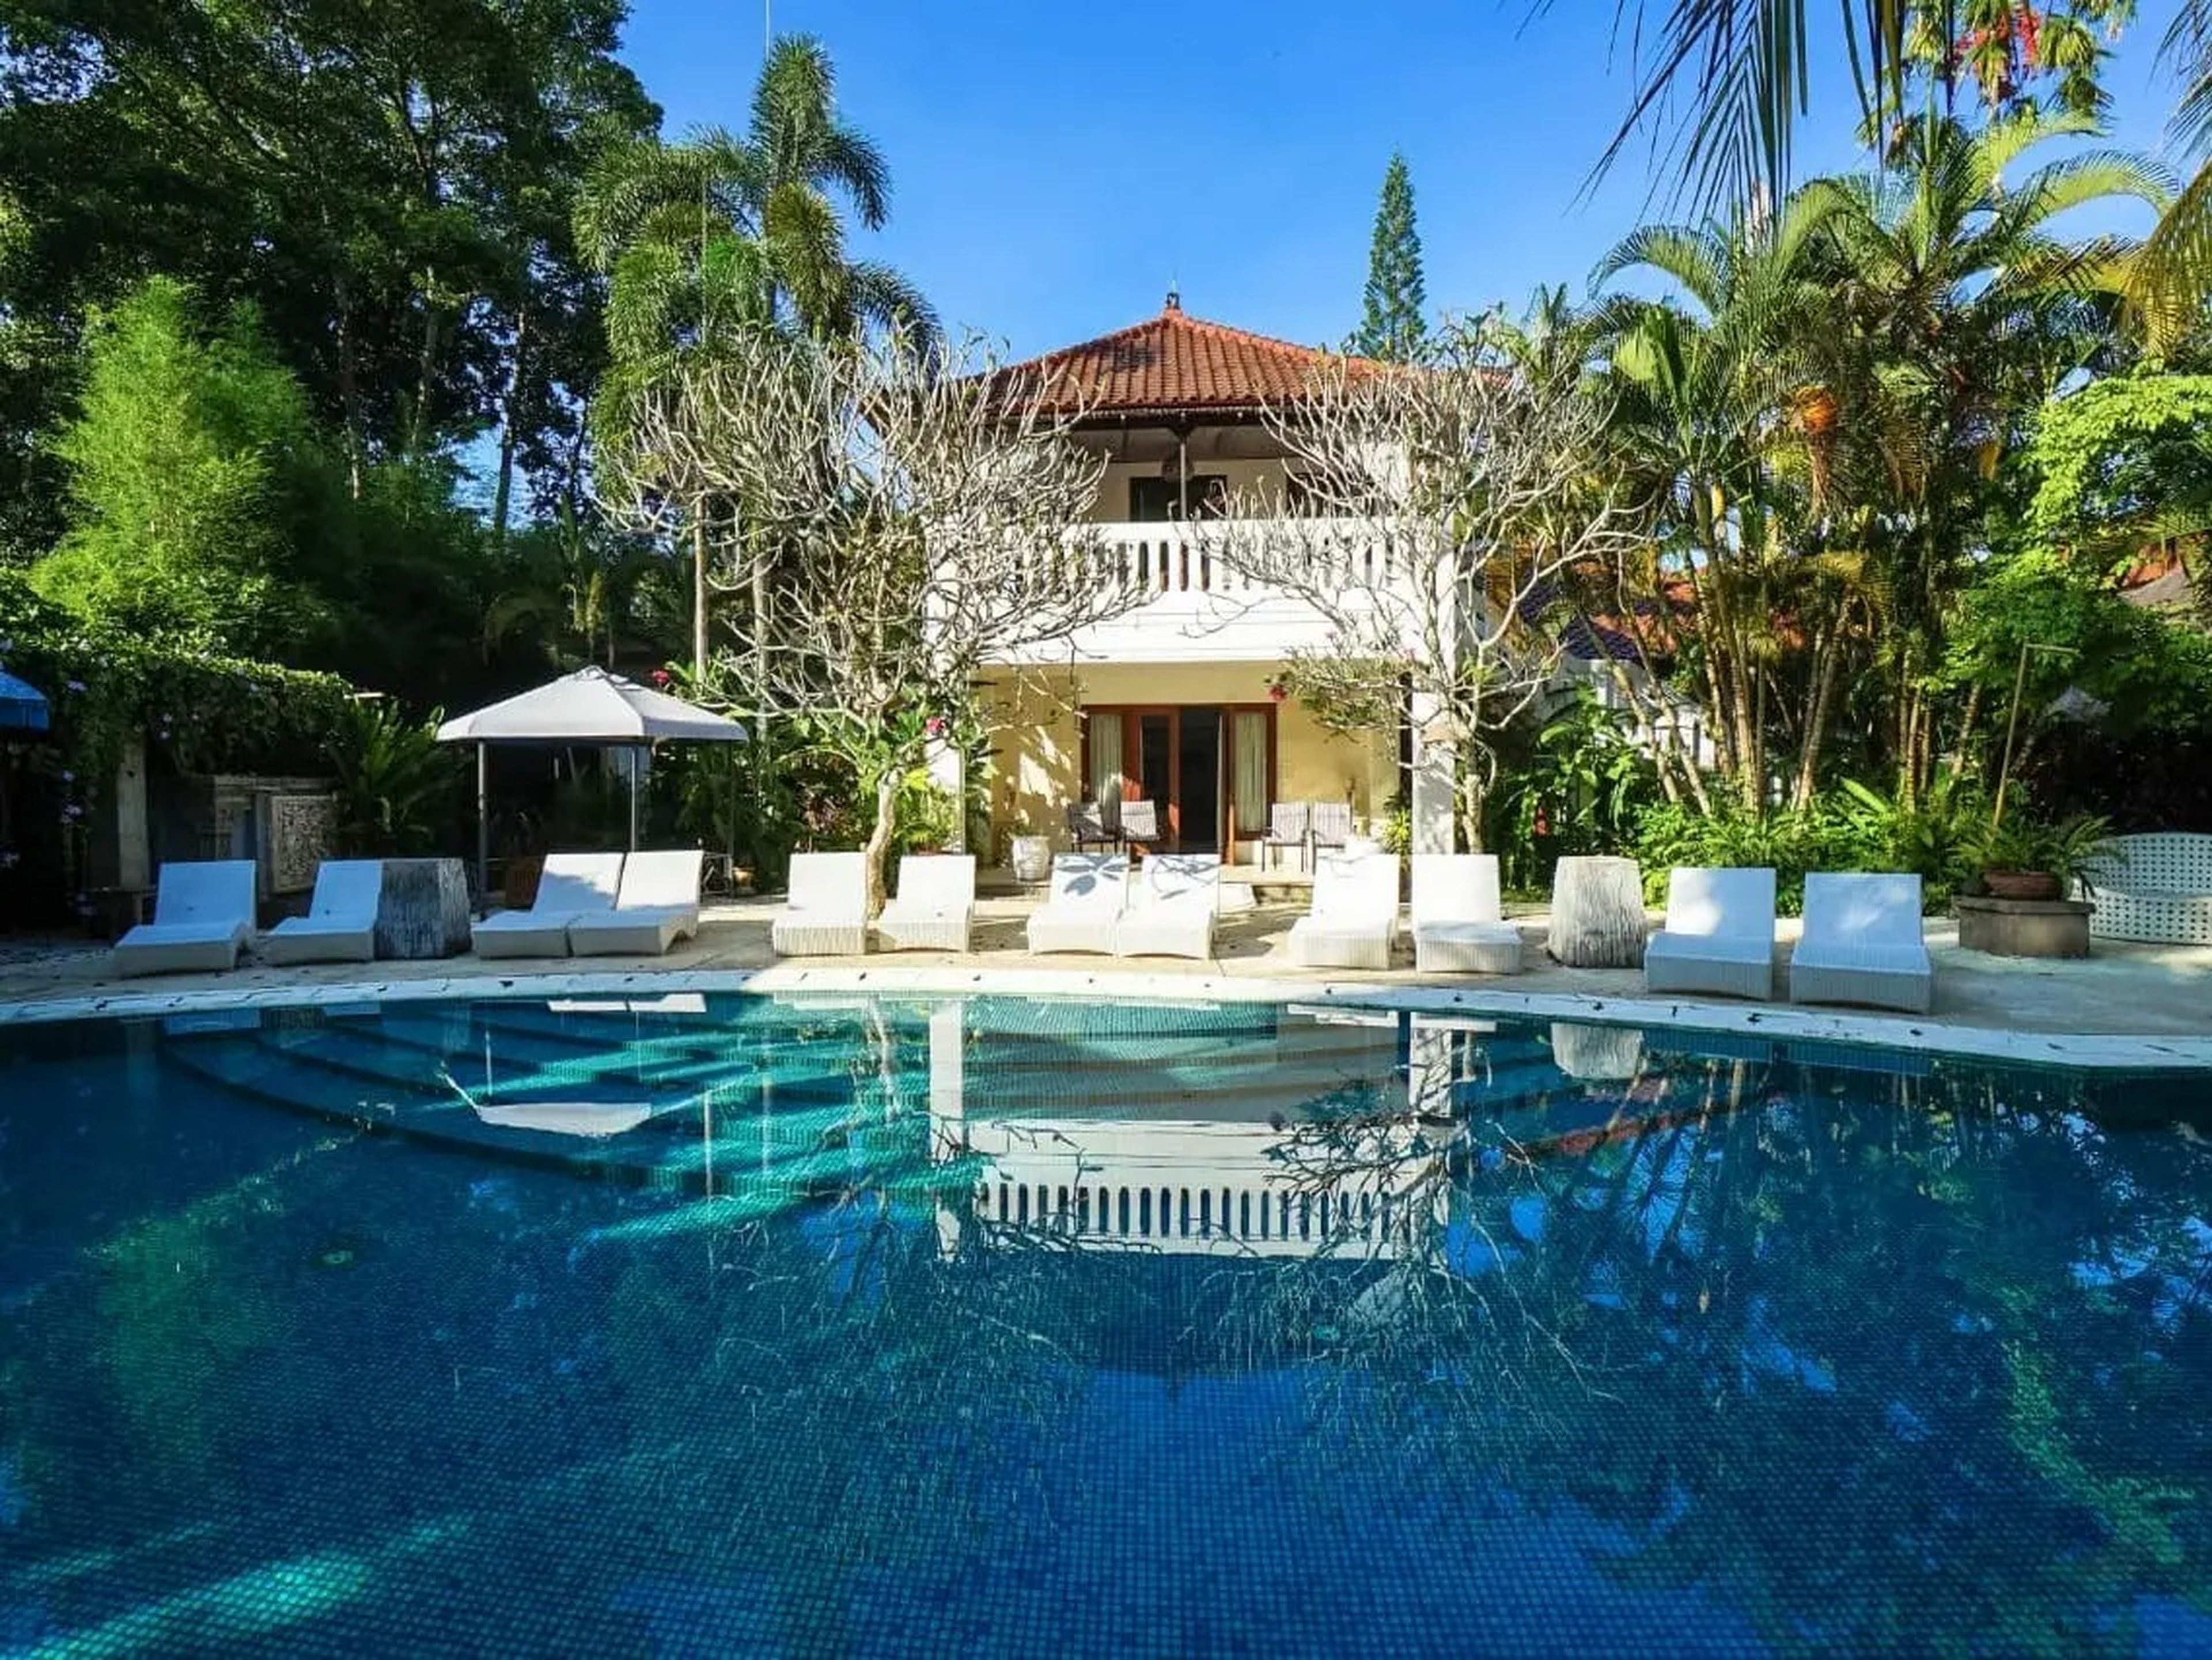 One of the swimming bools at The Mansion Bali, Ubud, Bali, "luxury hotels around the world that start under $150 a night."